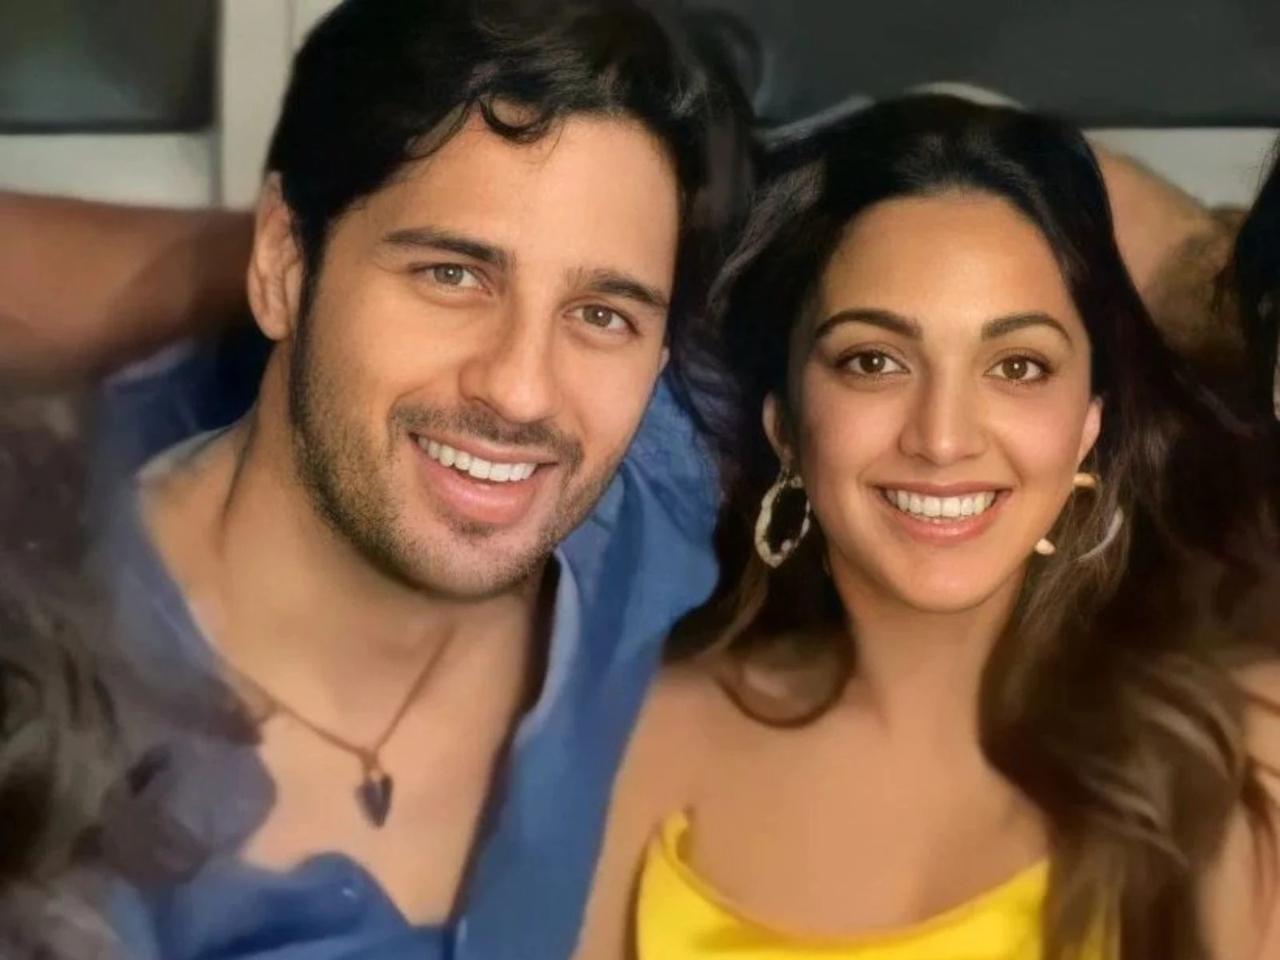 In 2021, Sidharth was a part of Kiara's intimate birthday celebration at her home. The actress had shared a video on Instagram giving a glimpse into her birthday celebration. While she did her best to not bring Sid's presence to people's notice, fans noticed him and blink and miss appearance